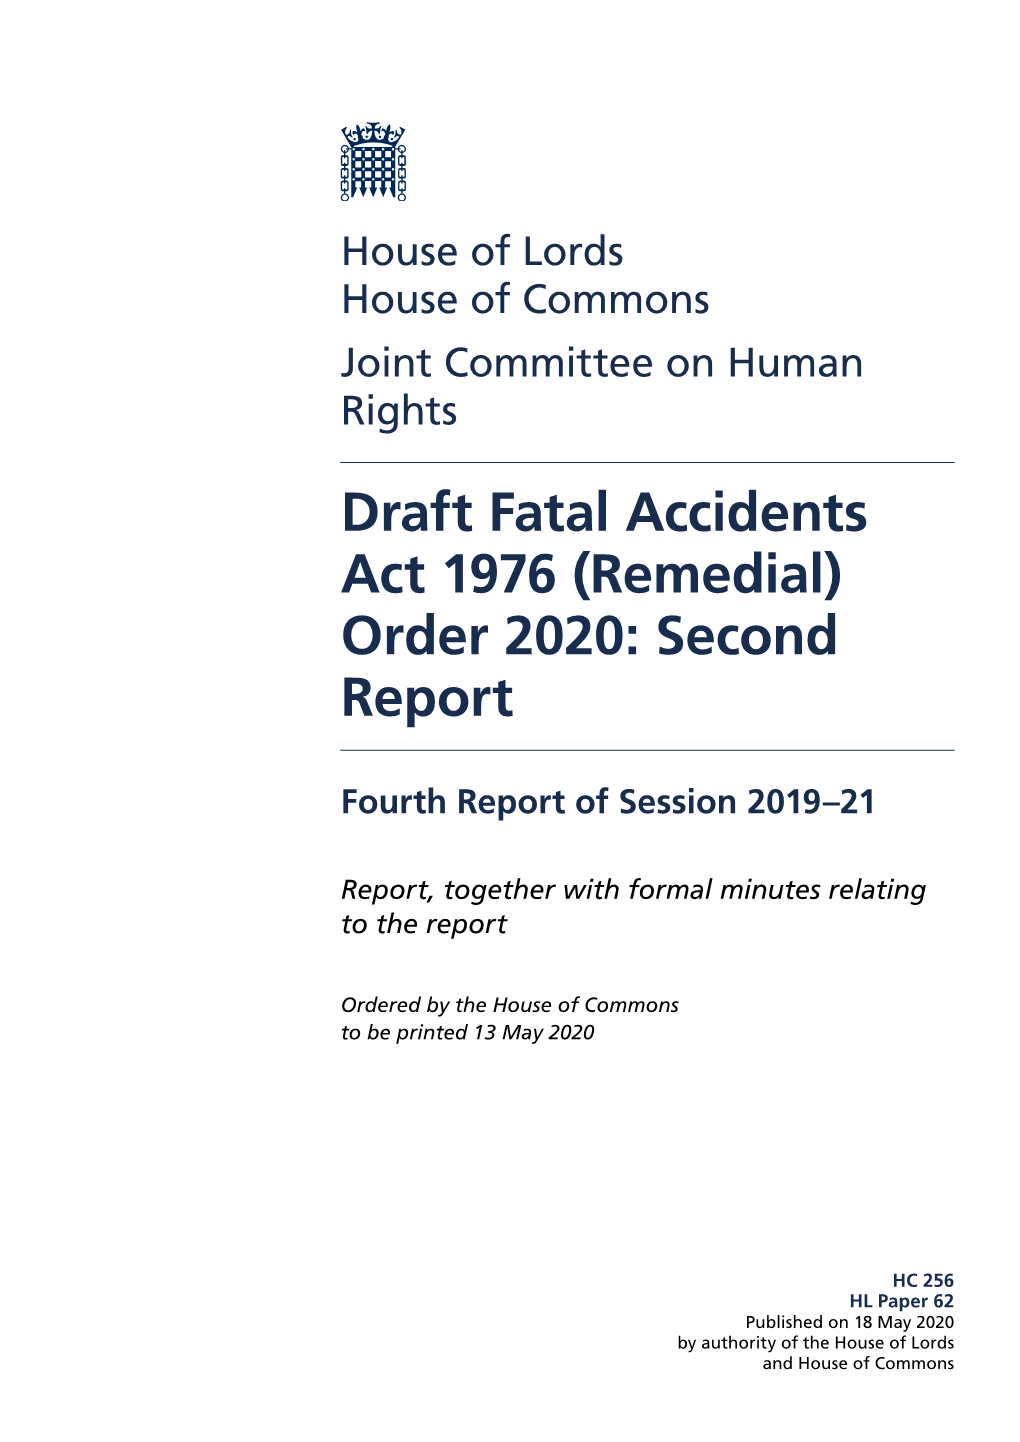 Draft Fatal Accidents Act 1976 (Remedial) Order 2020: Second Report